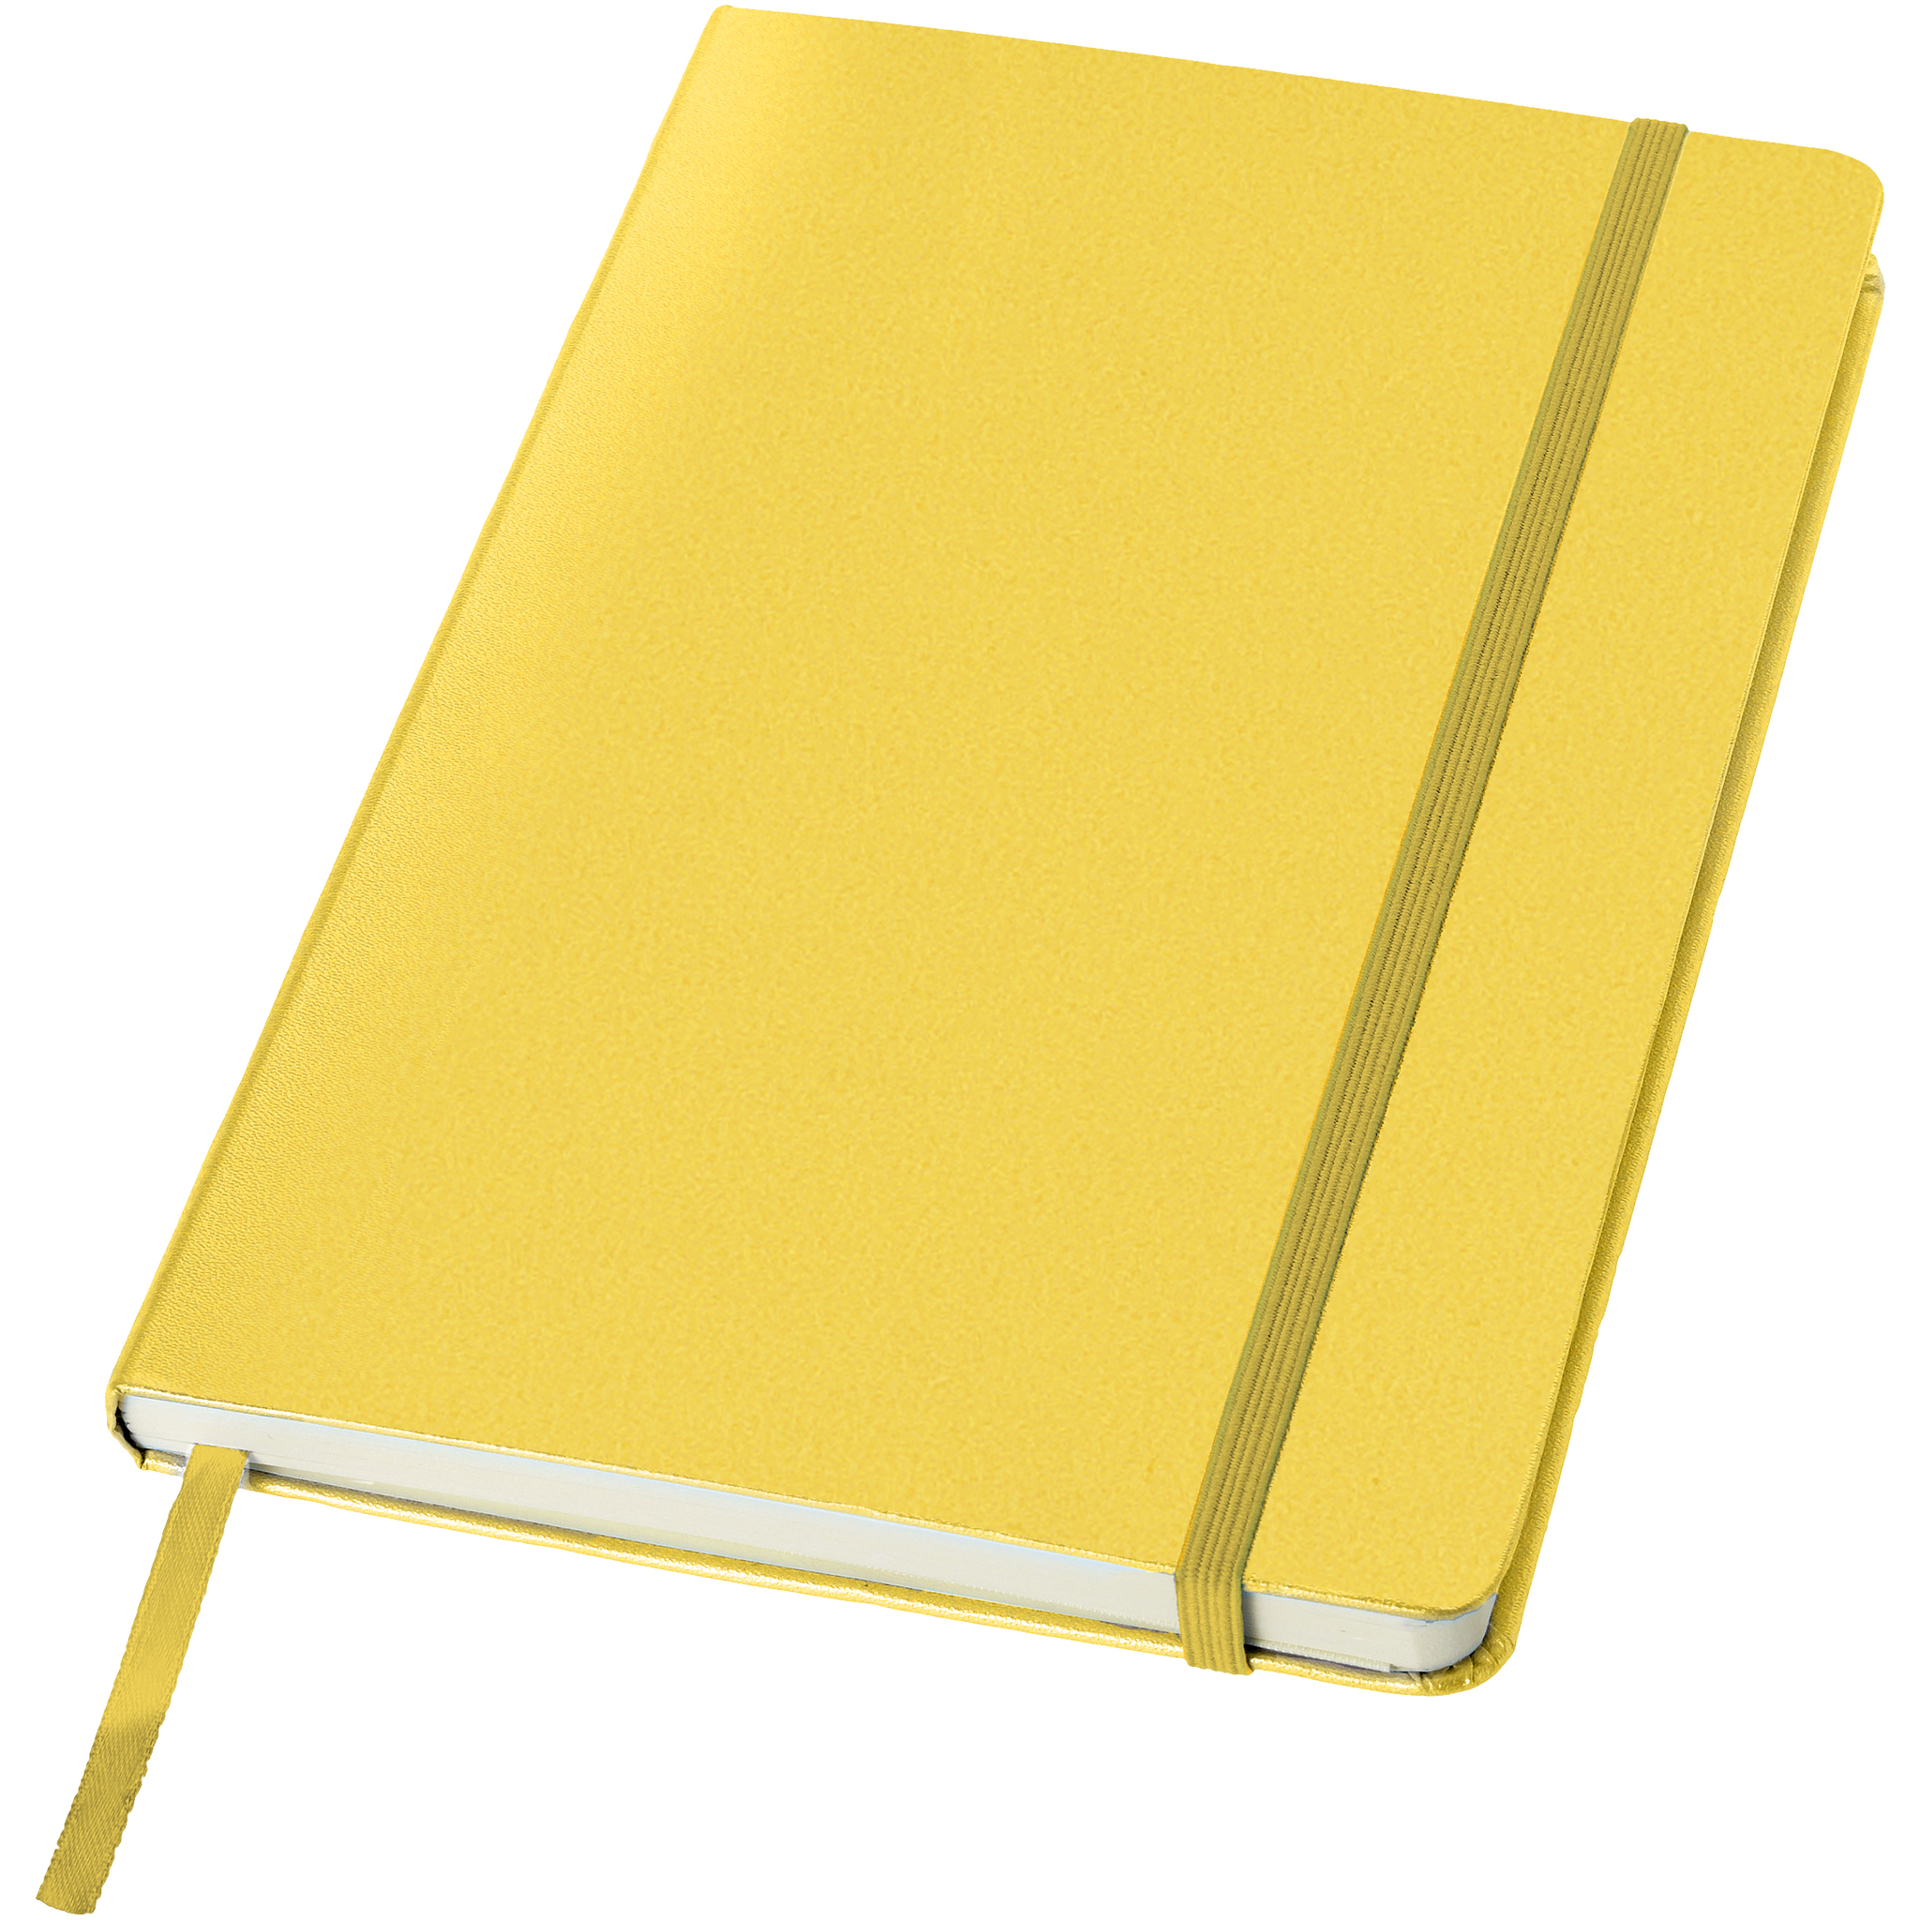 A5 hard cover notebook in yellow with yellow elastic closure and ribbon